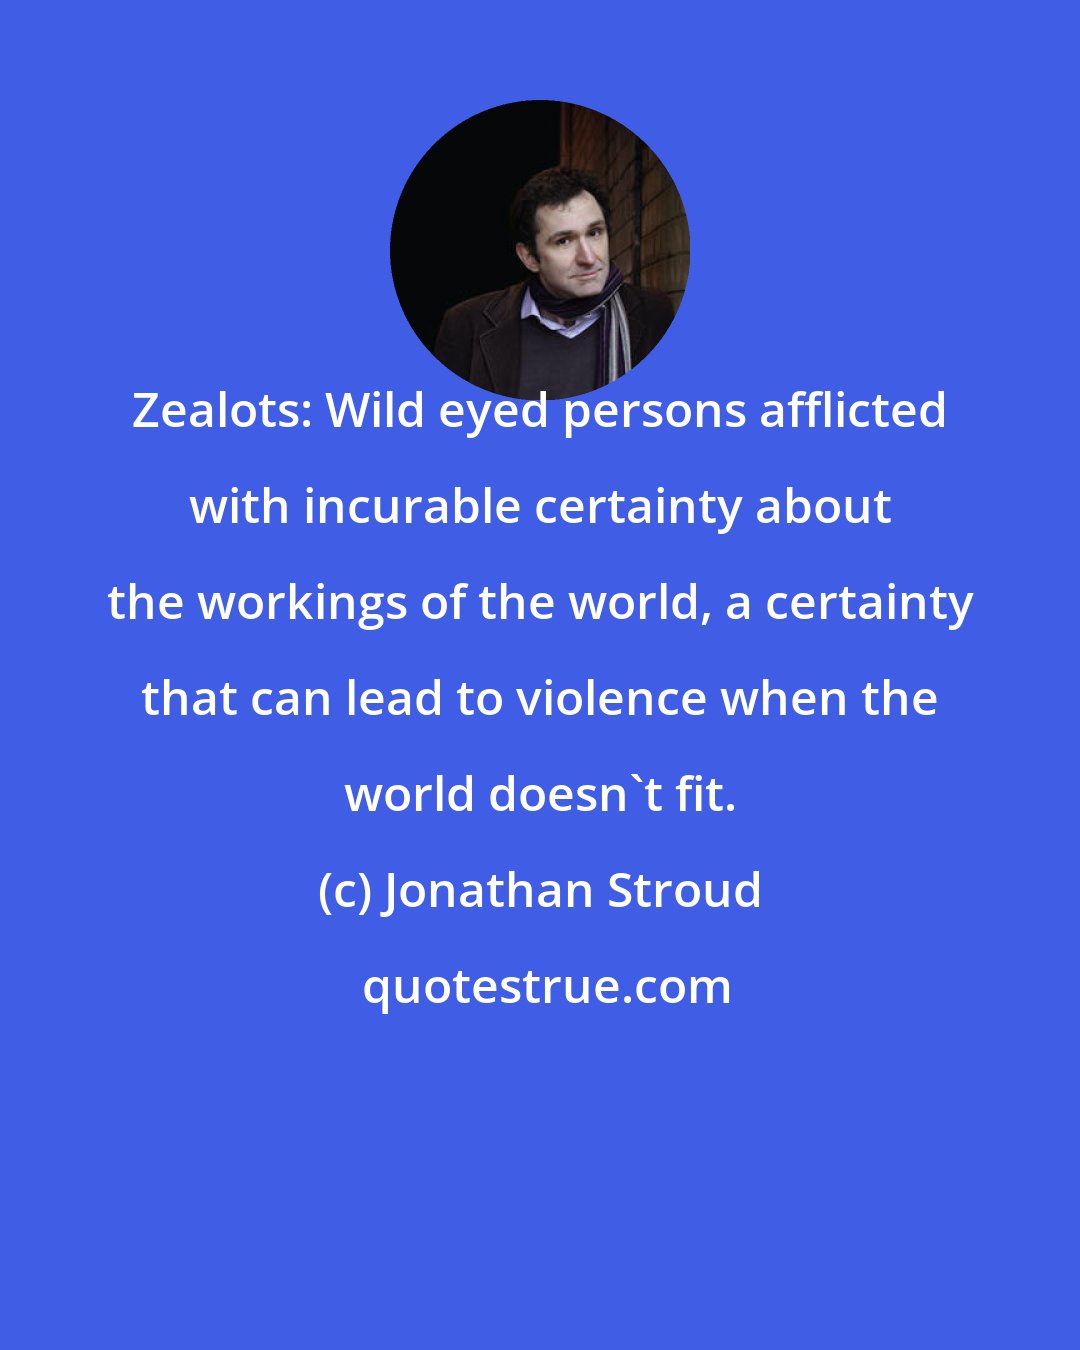 Jonathan Stroud: Zealots: Wild eyed persons afflicted with incurable certainty about the workings of the world, a certainty that can lead to violence when the world doesn't fit.